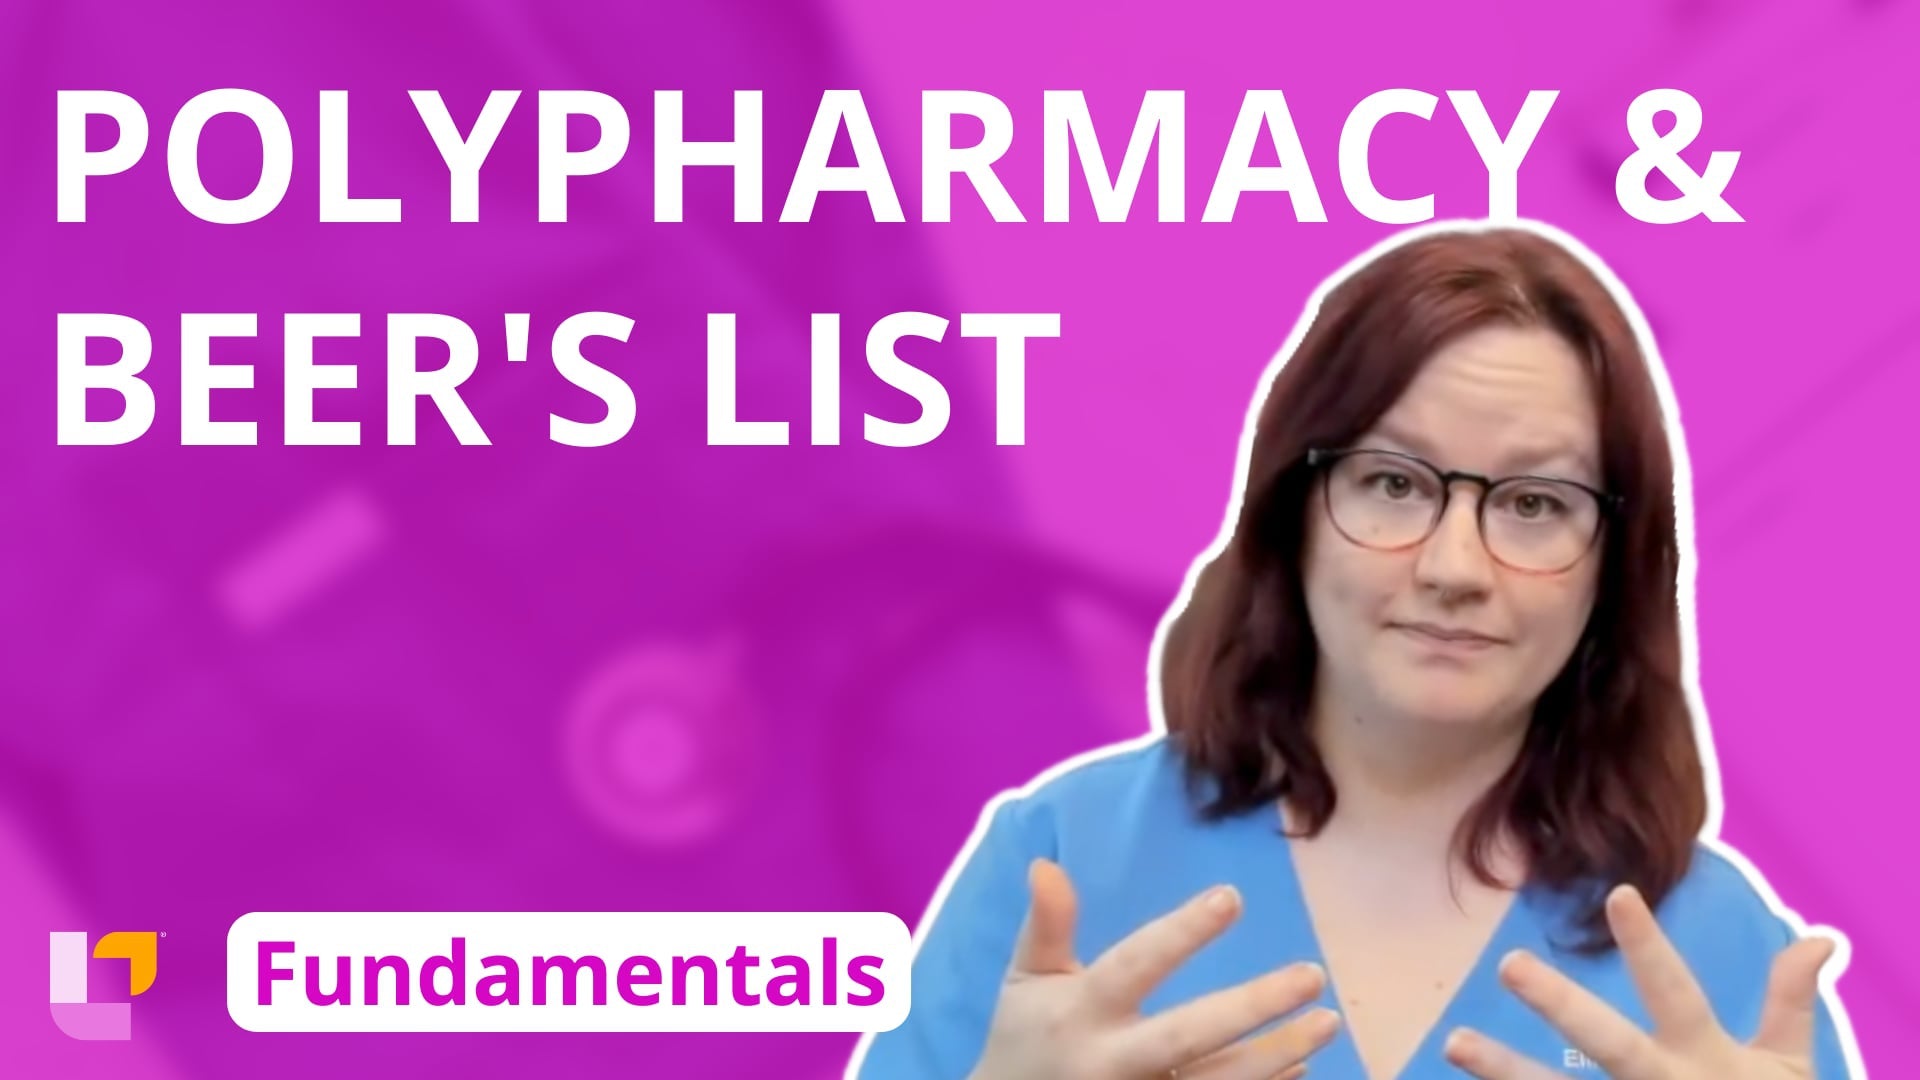 Fundamentals - Gerontology, part 11: Polypharmacy and Beer's List - LevelUpRN